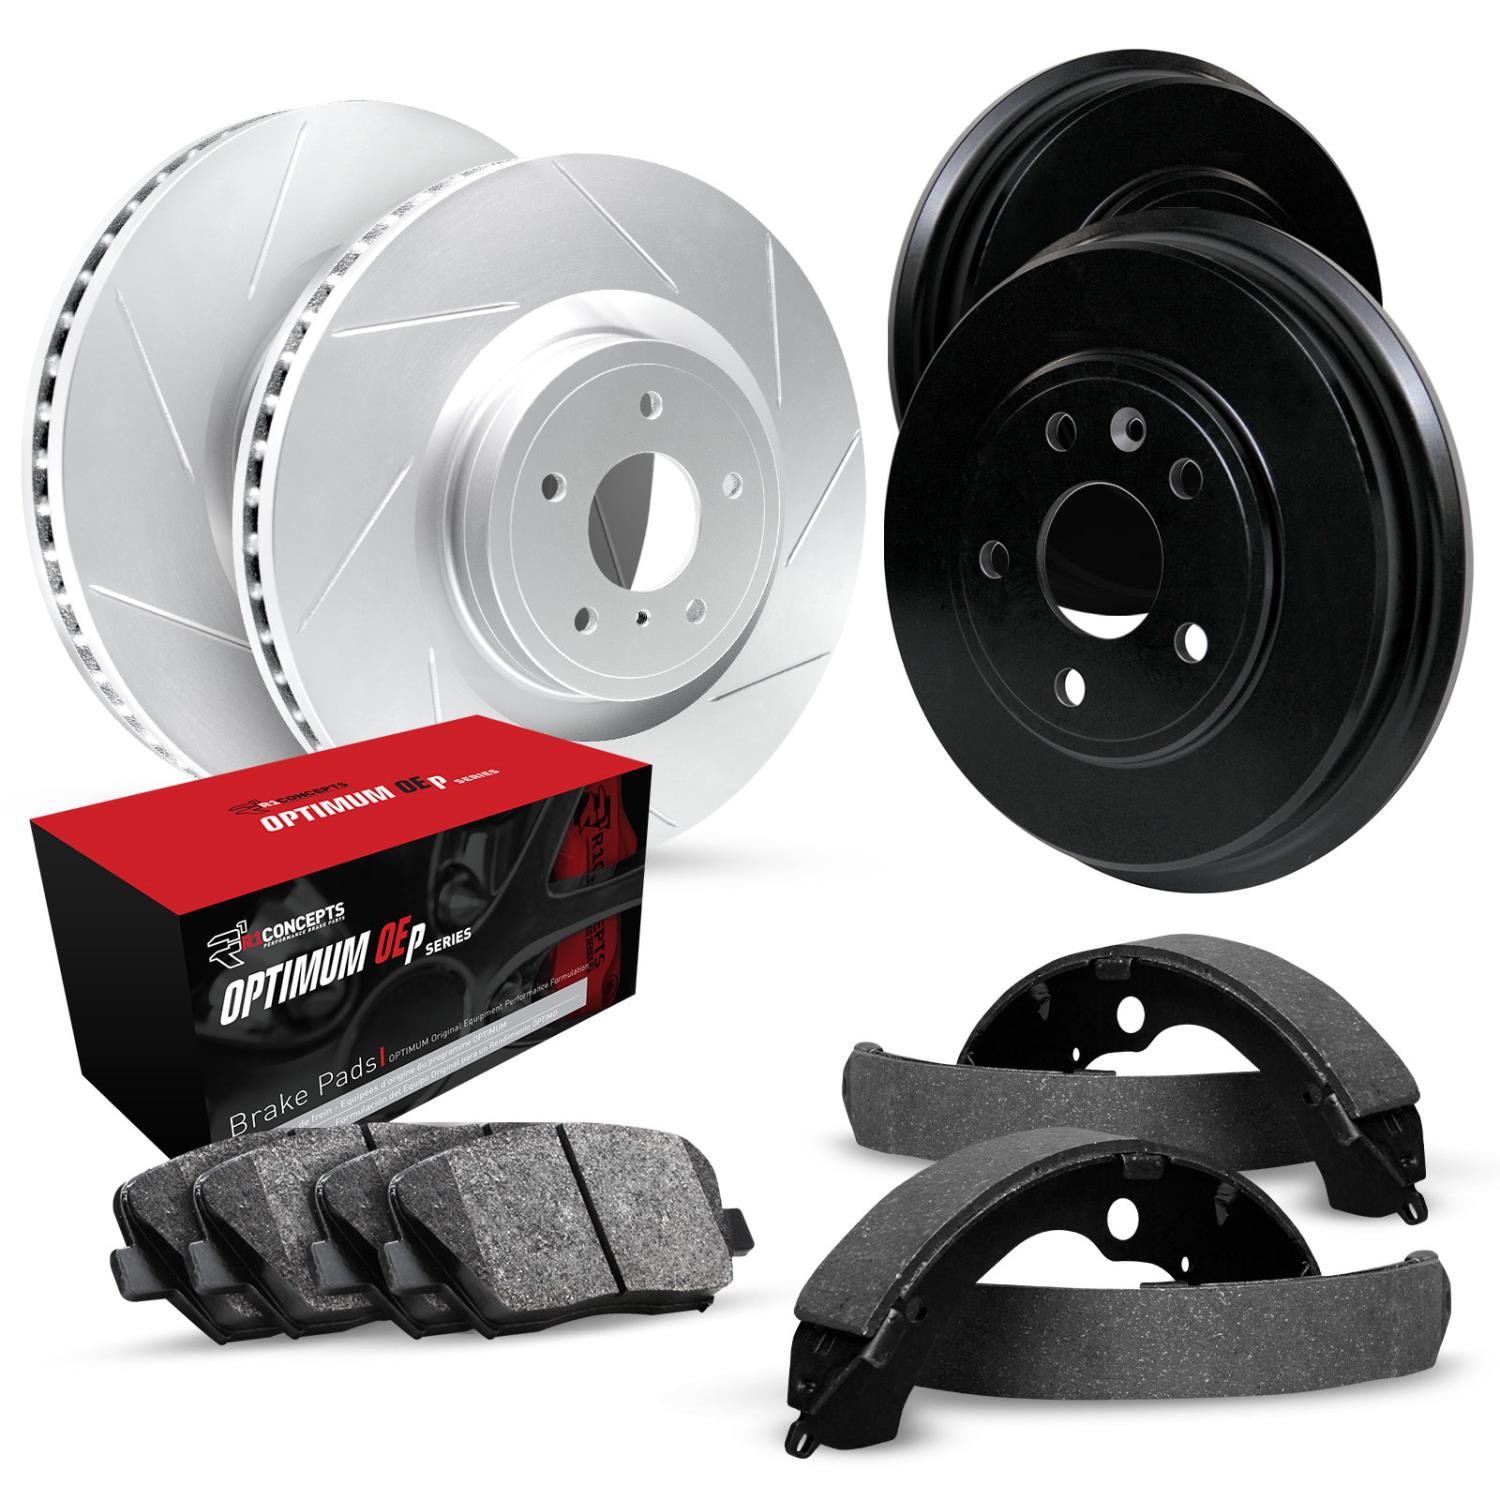 GEO-Carbon Slotted Brake Rotor & Drum Set w/Optimum OE Pads & Shoes, 1969-1972 GM, Position: Front & Rear